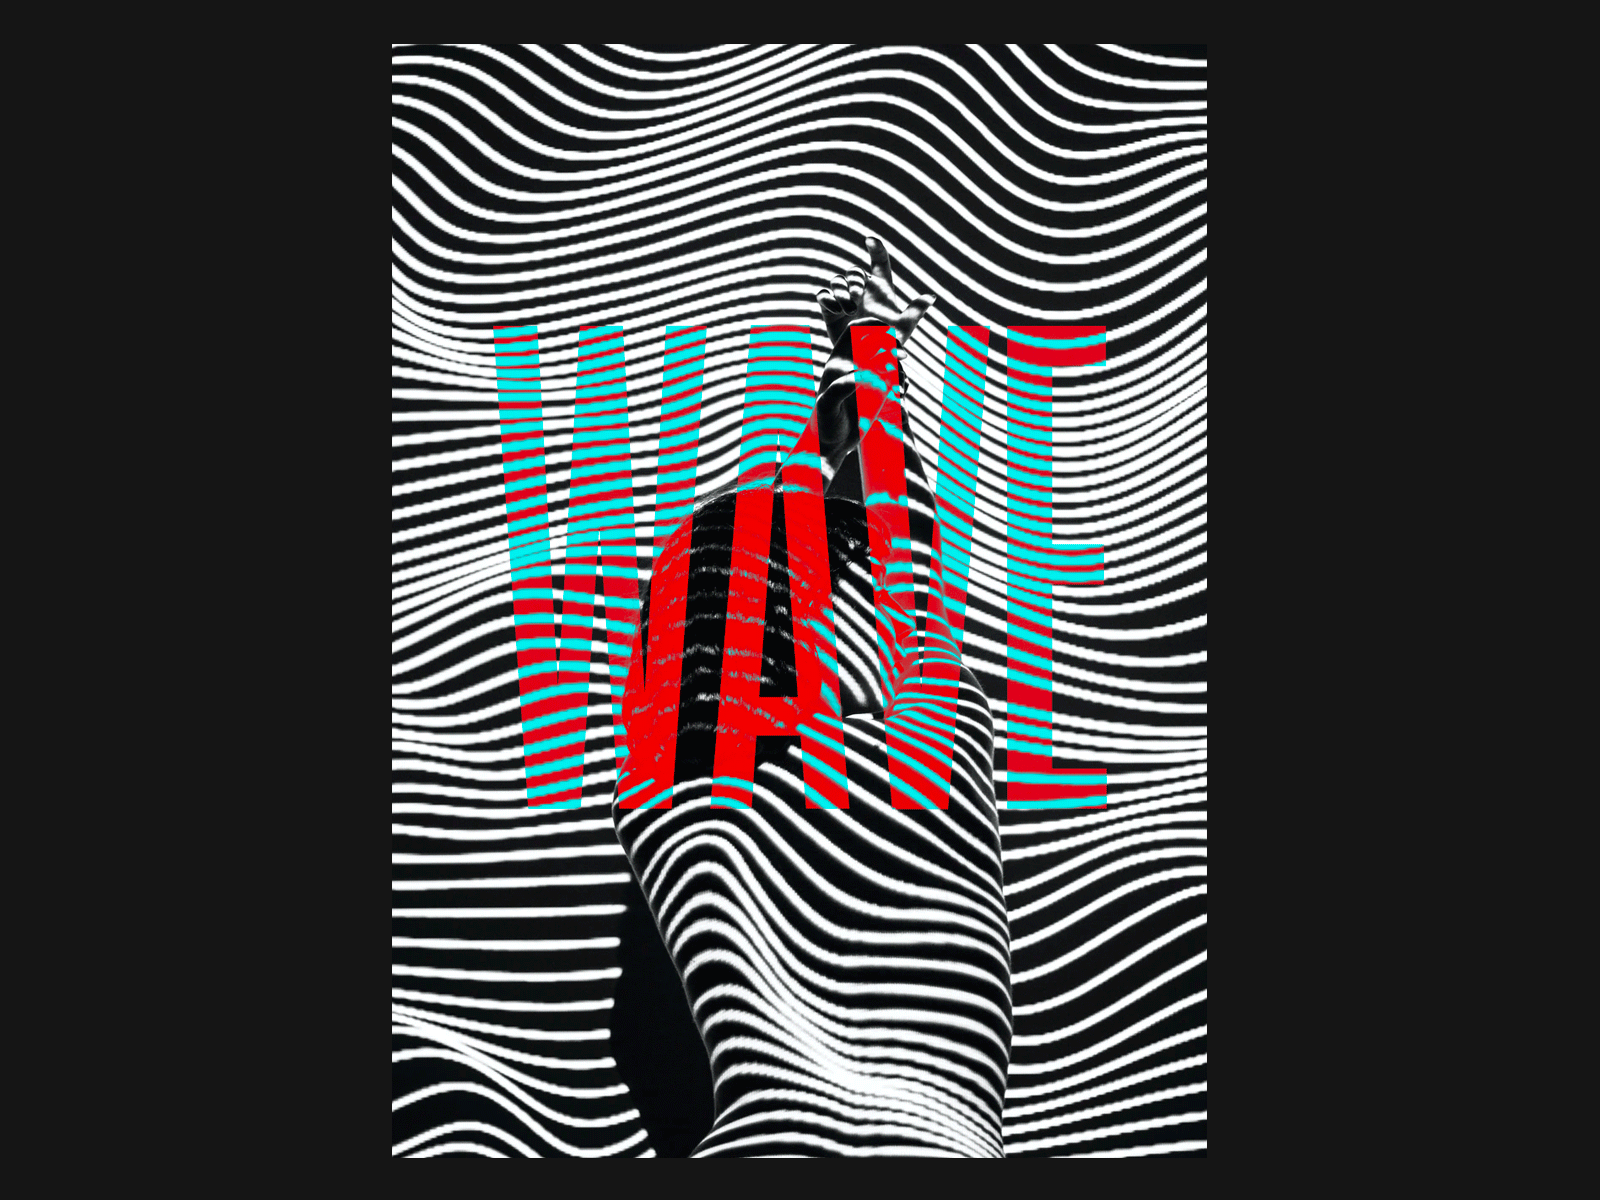 wave / grid / wide black white blackandwhite blend brand brand design branding branding design grid identity identity design poster poster a day poster design red typogaphy visual visual design visual identity wave wide